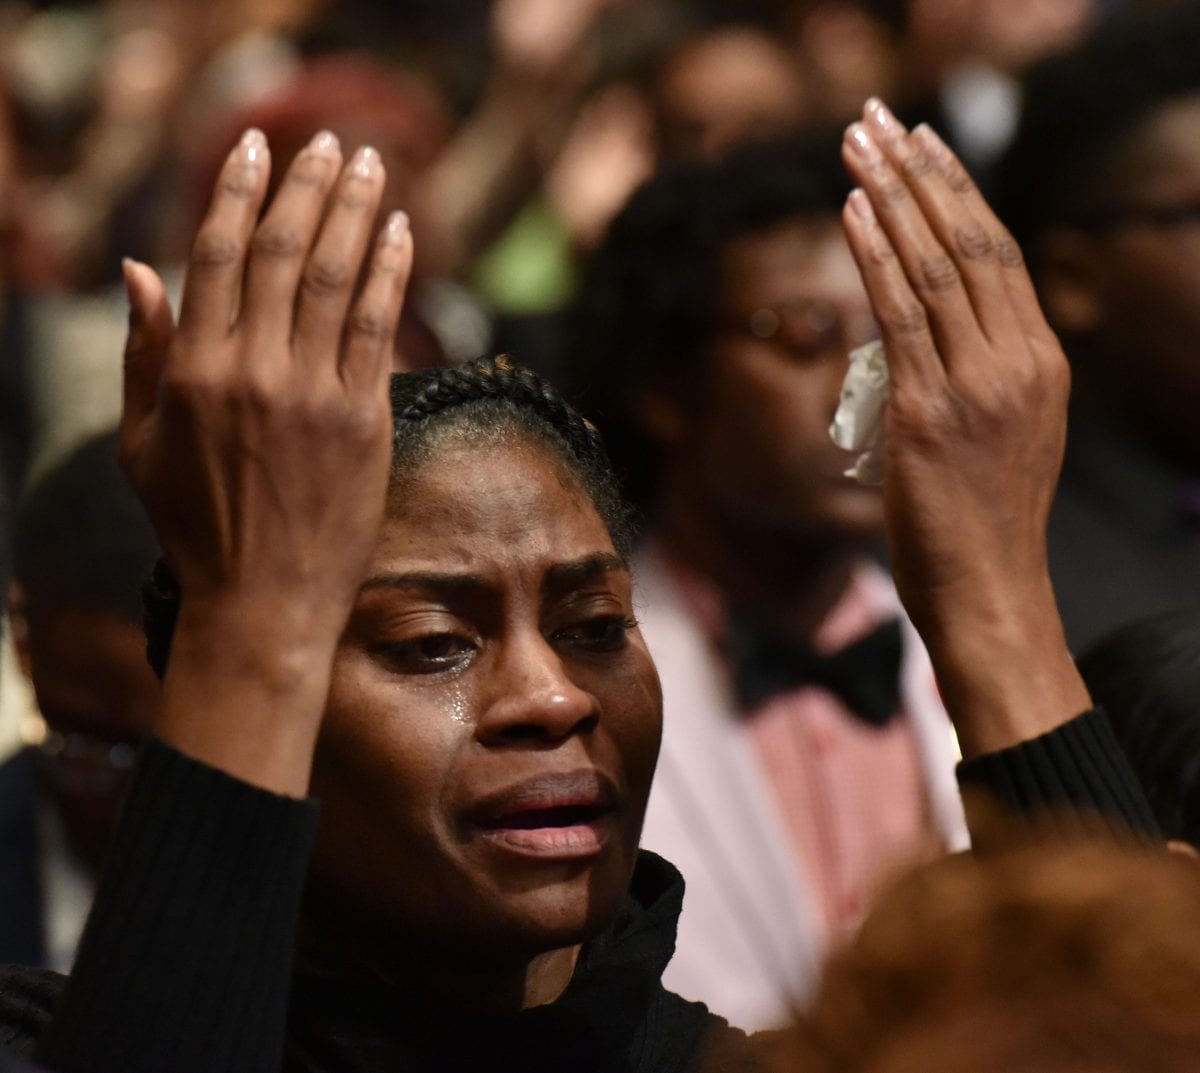 JANUARY 25, 2017 LITHONIA Mourners fill the sanctuary during the Homegoing services for Bishop Eddie Long, senior pastor, at New Birth Missionary Baptist Church, Wednesday, January 25, 2017. Bishop Long died January 15th, after a long-time fight with cancer. He was 63 years old. Hyosub Shin/AJC